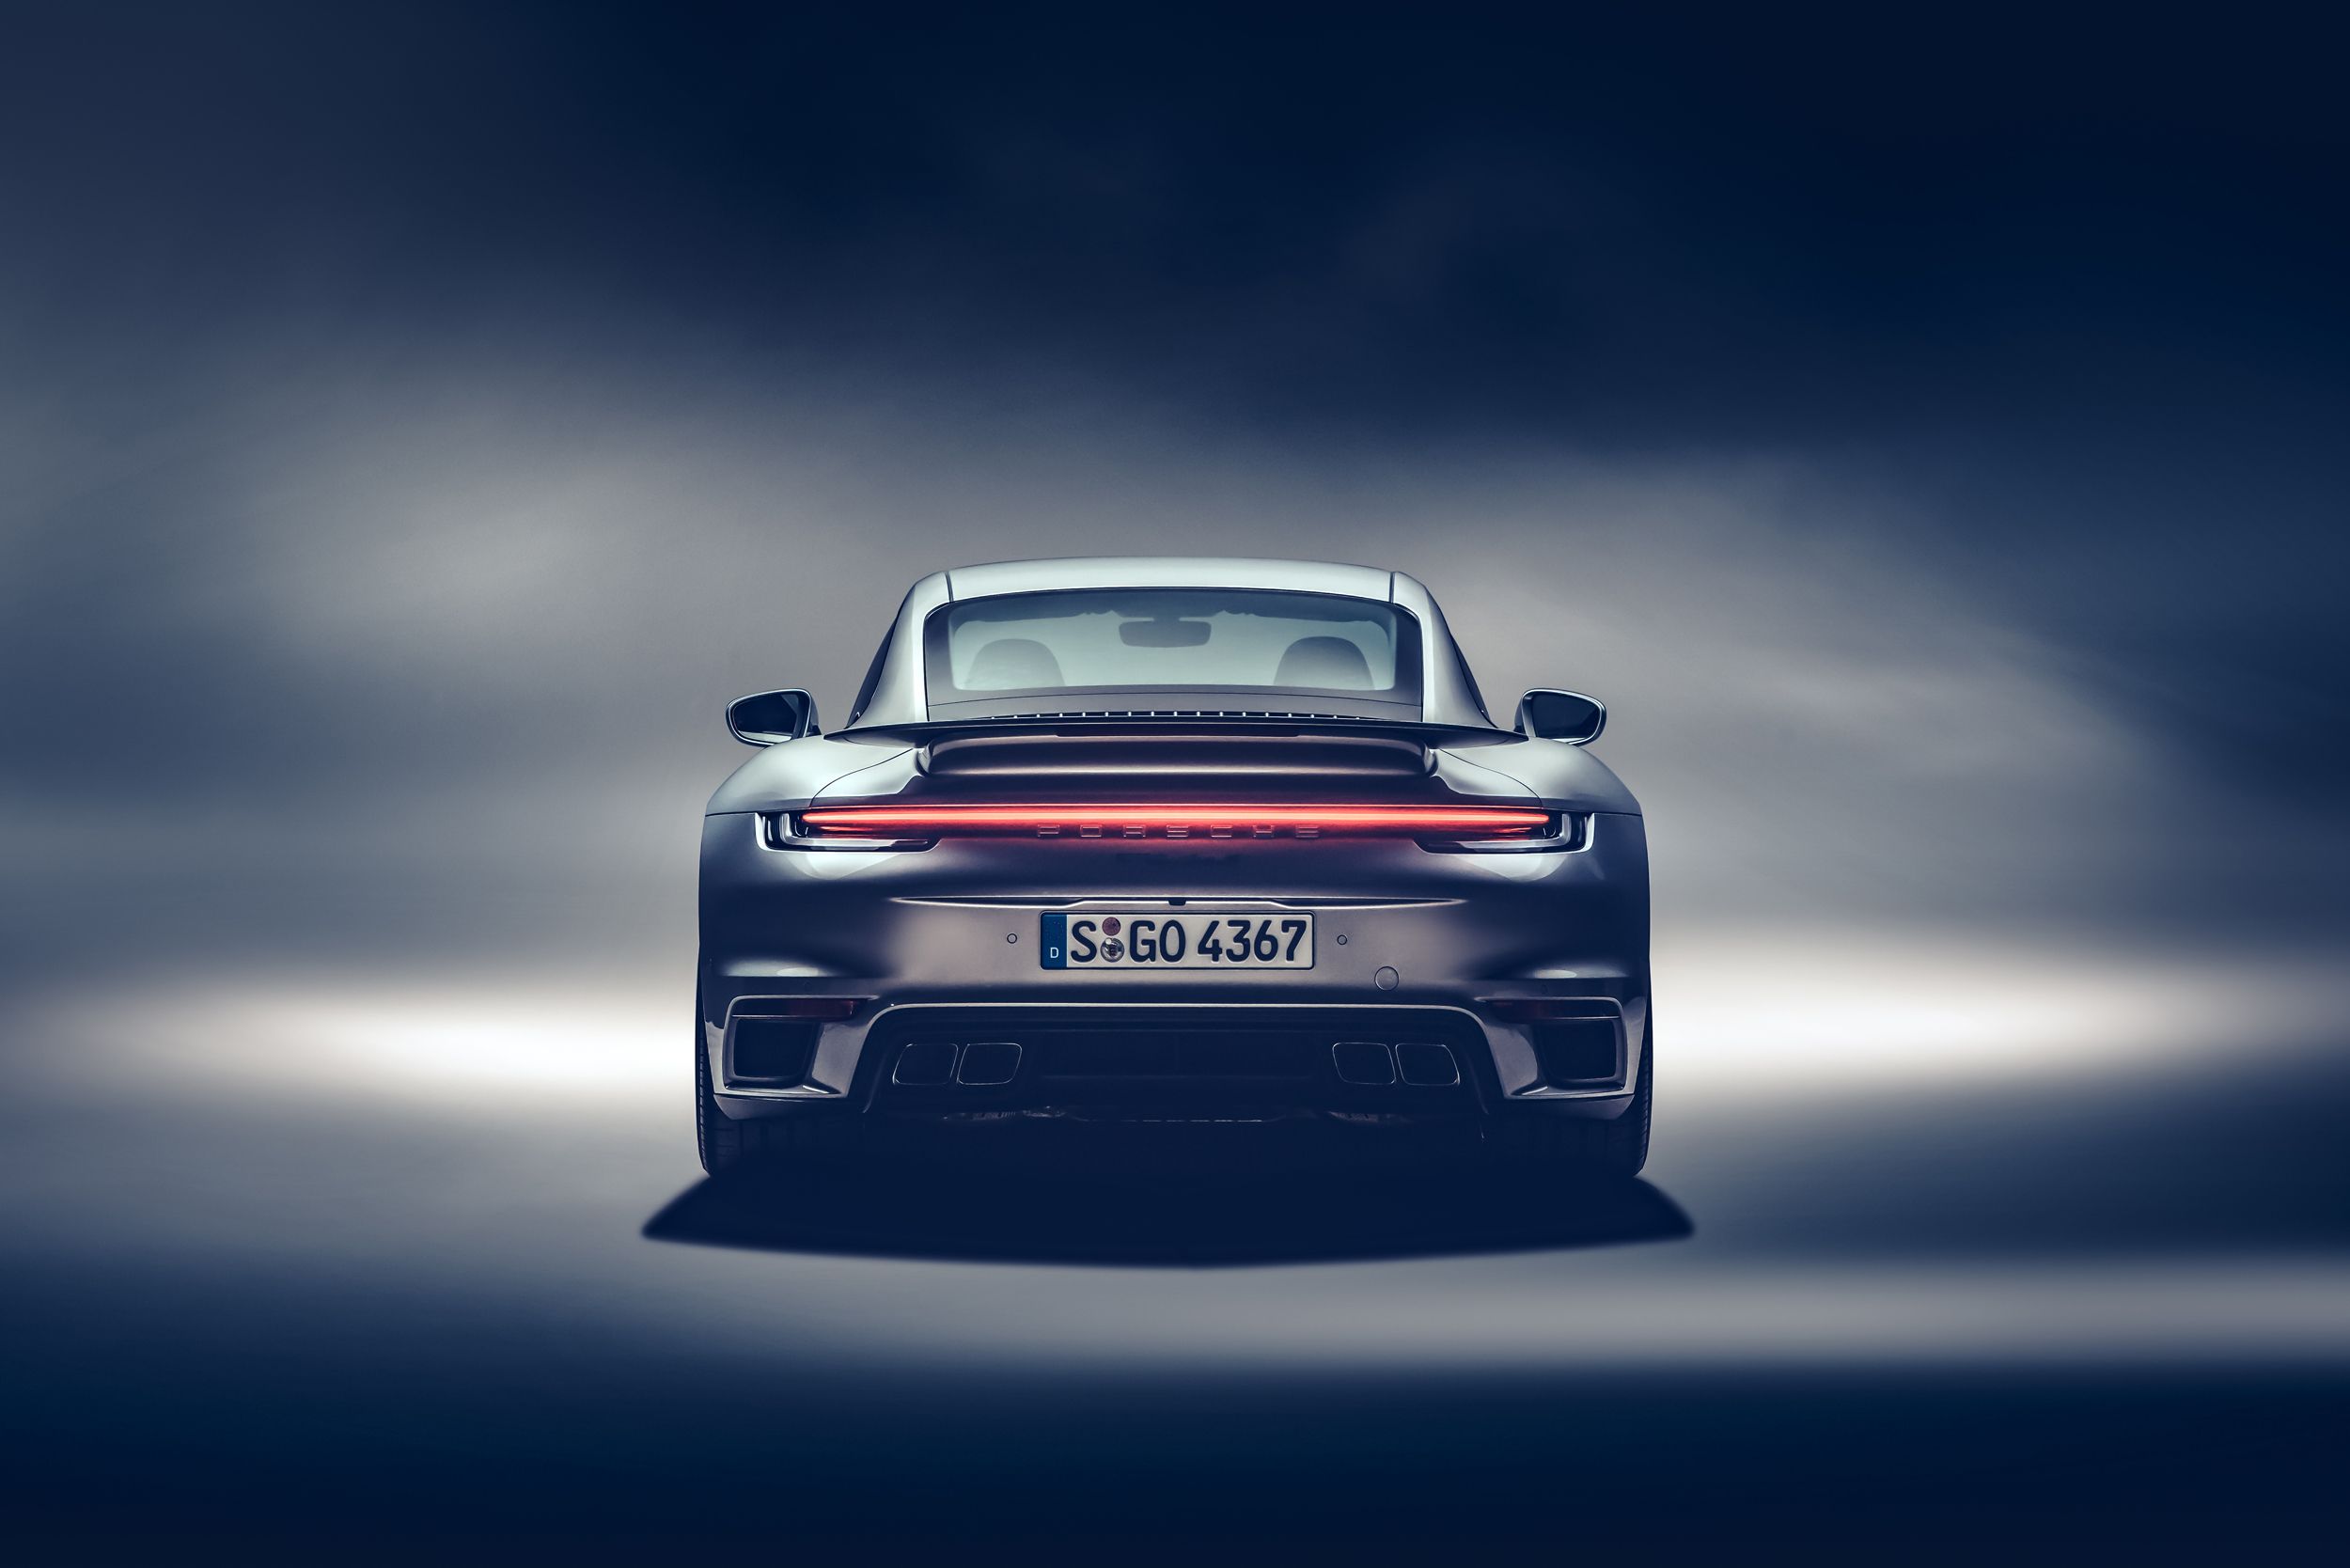 Porsche 911 Turbo S Rear, HD Cars, 4k Wallpaper, Image, Background, Photo and Picture